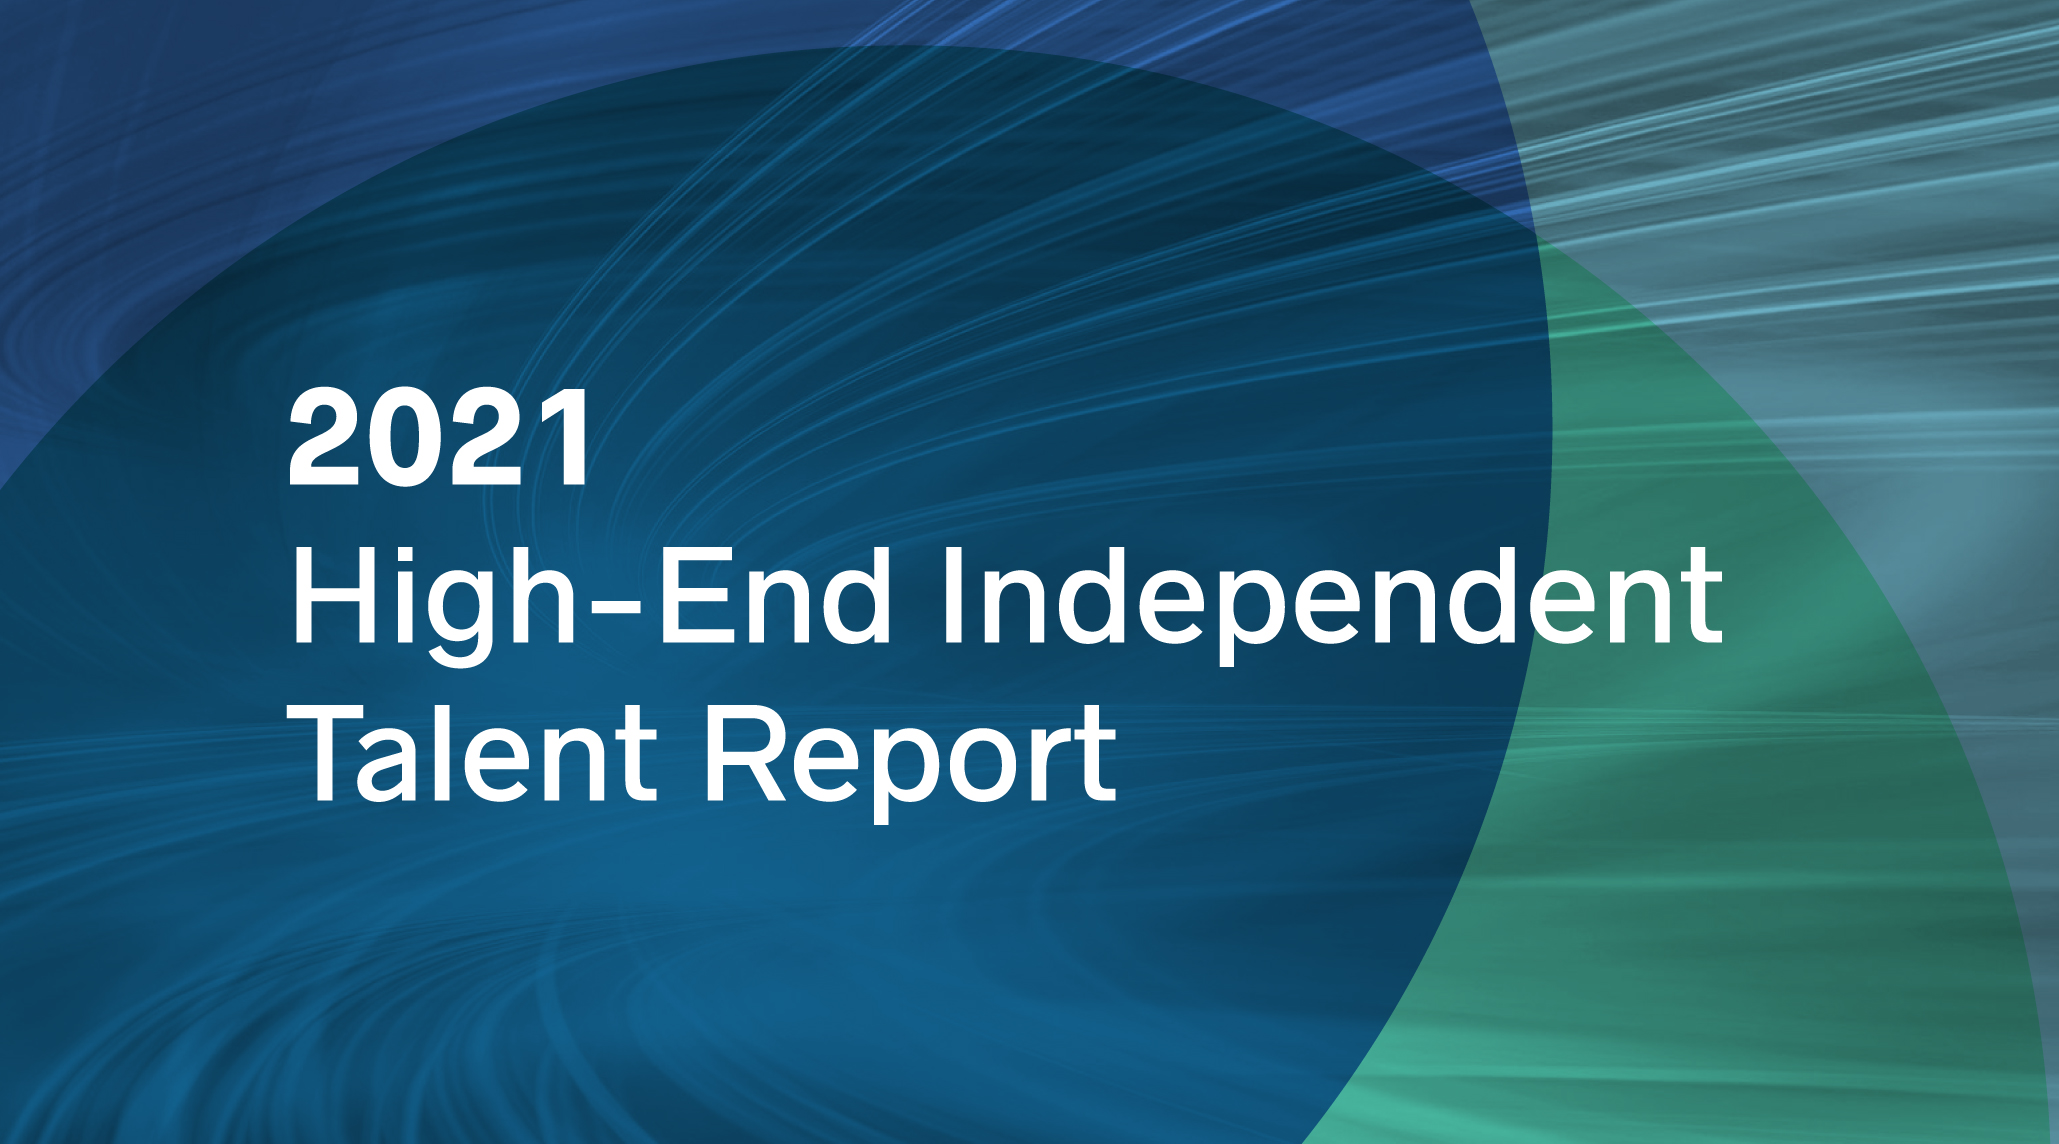 2021 High-End Independent Talent Report